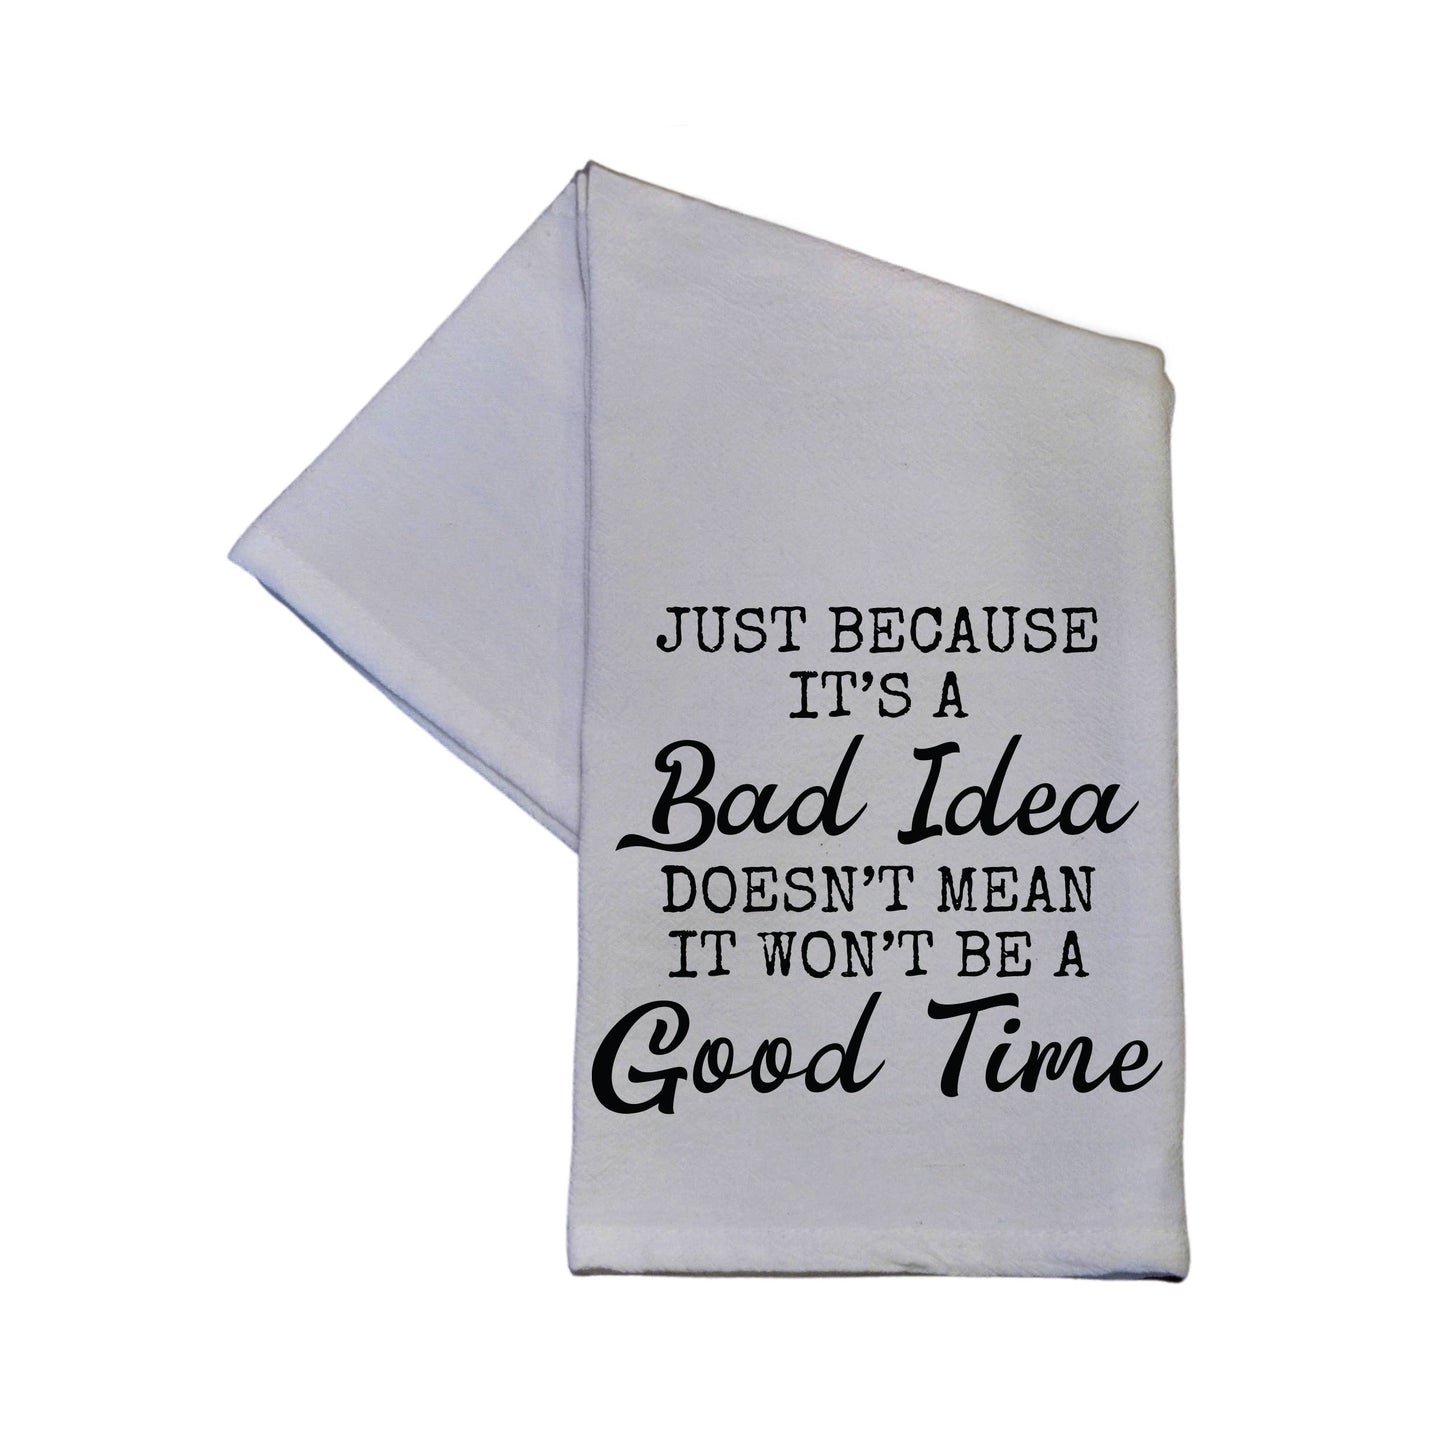 Driftless Studios - Just Because It Is A Bad Idea Cotton Hand Towel 16x24